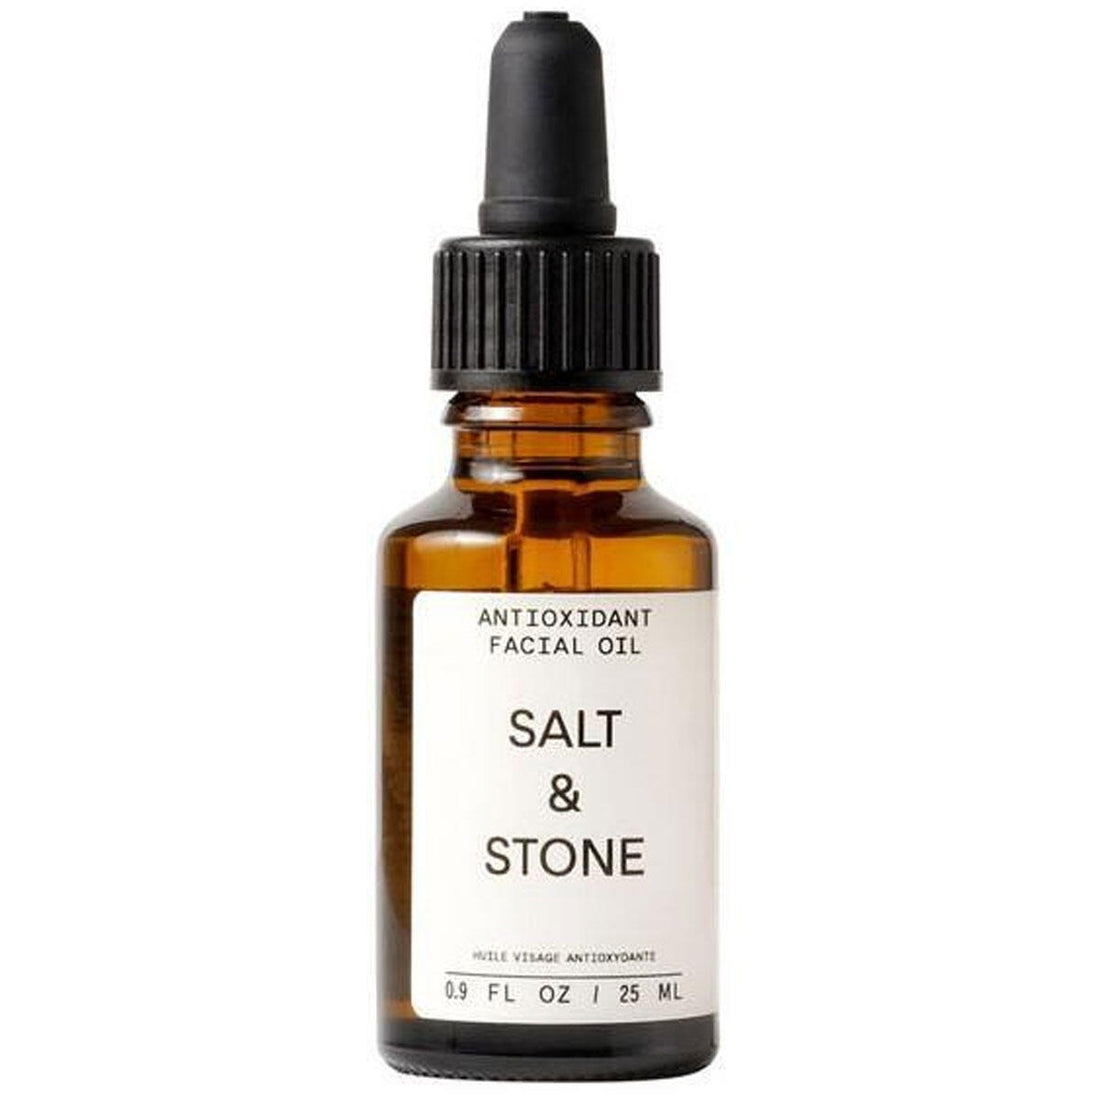 SALT AND STONE HYDRATING ANTIXOIDENT FACIAL OIL